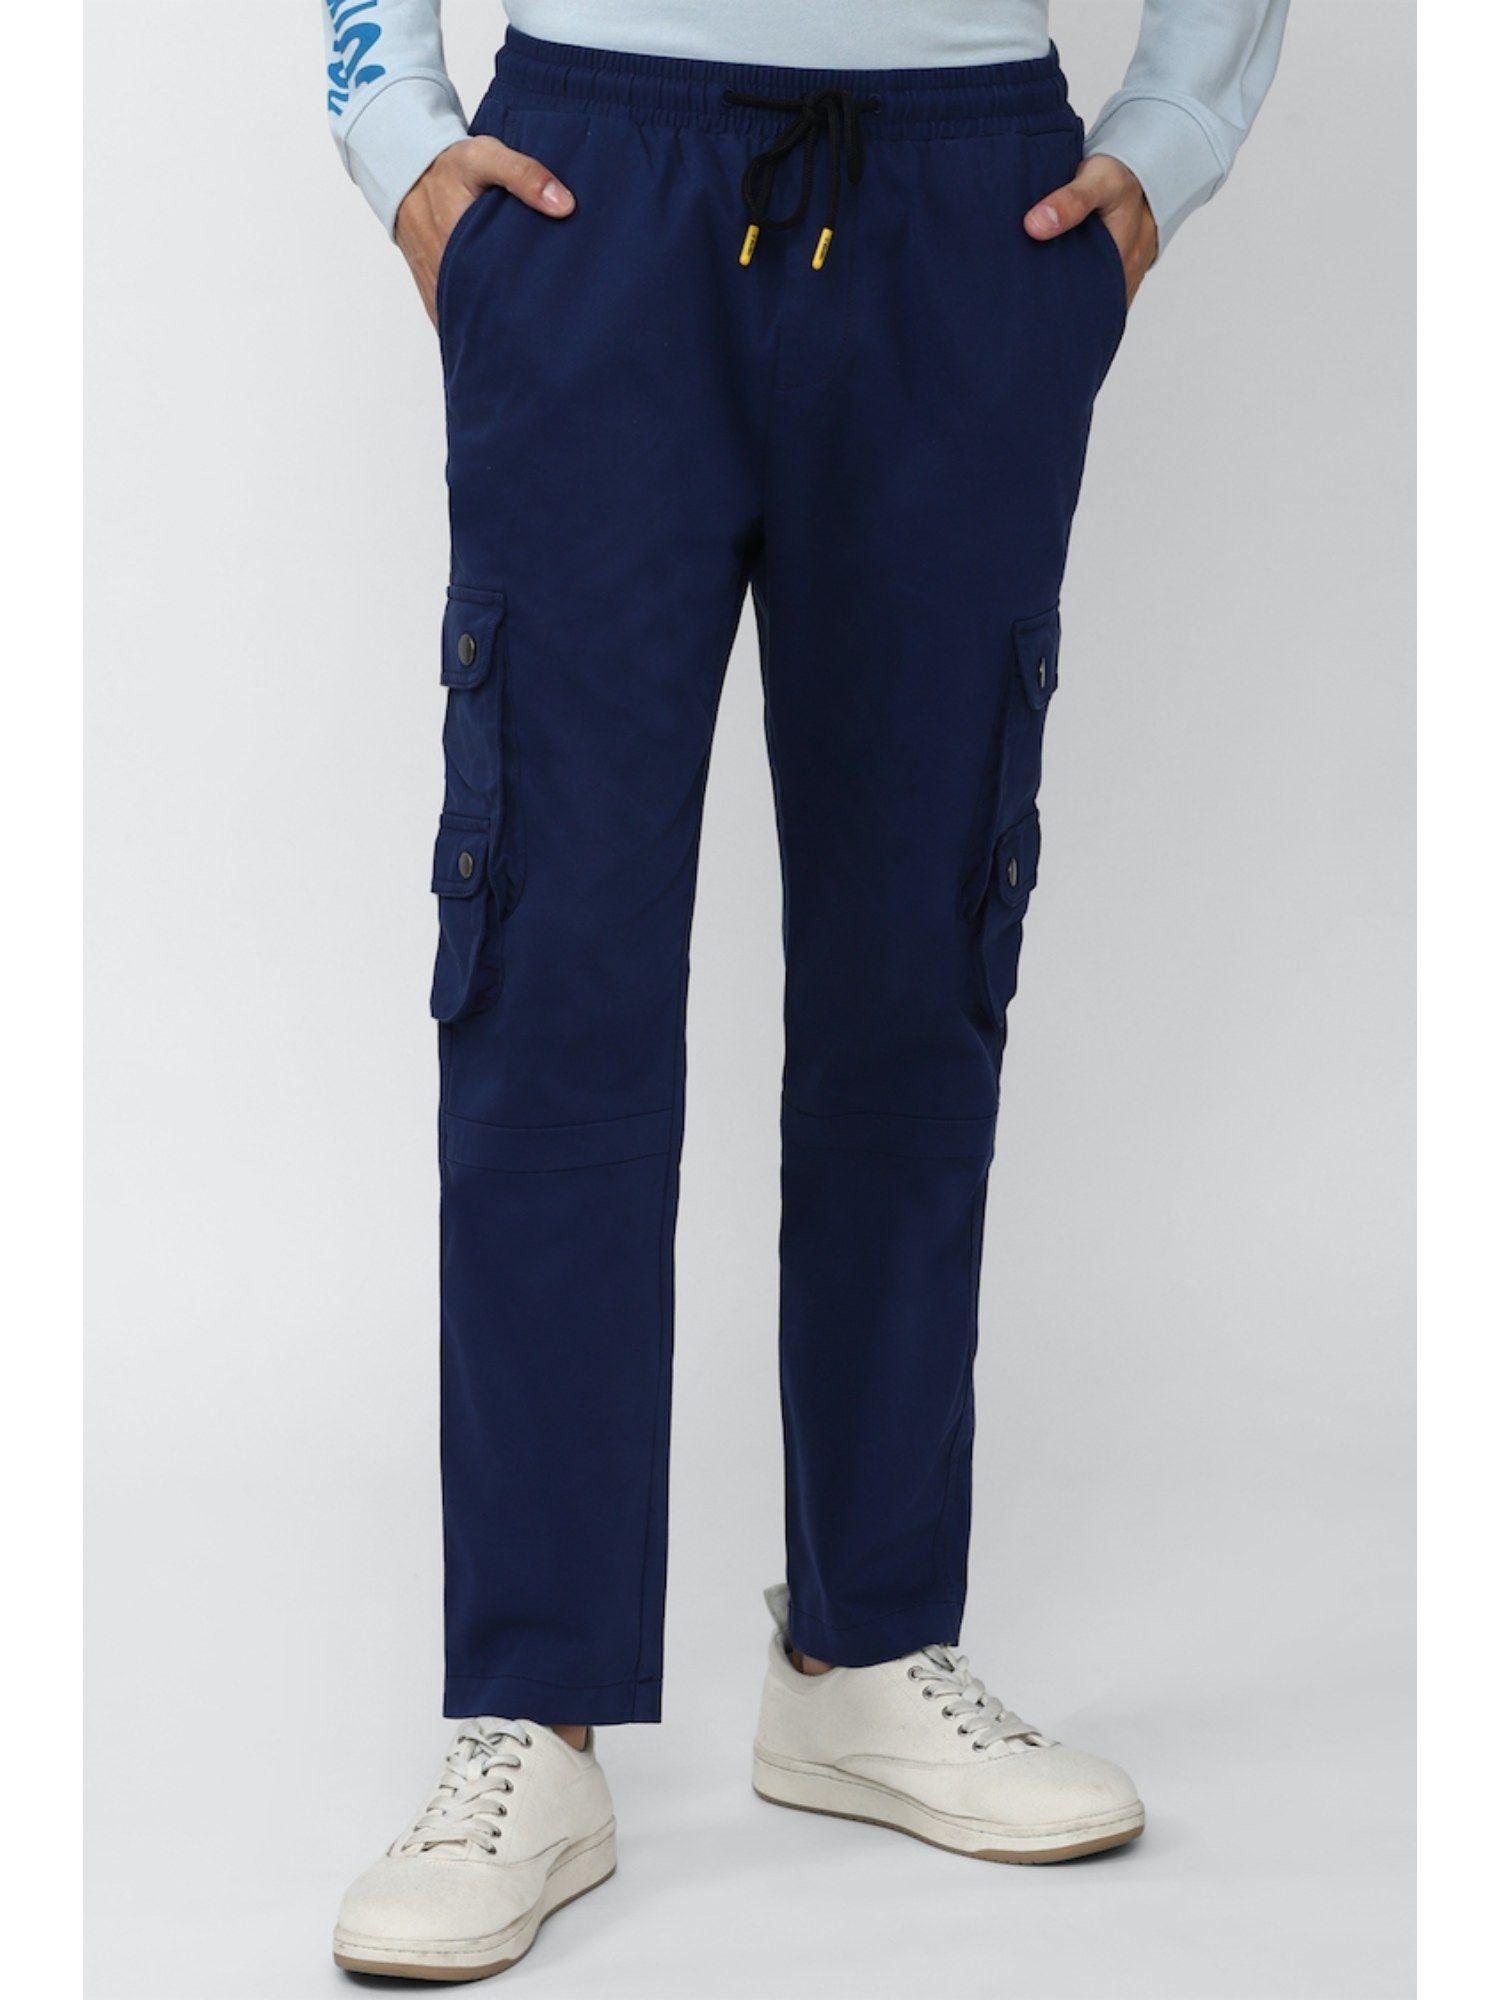 solid-pants-in-navy-blue